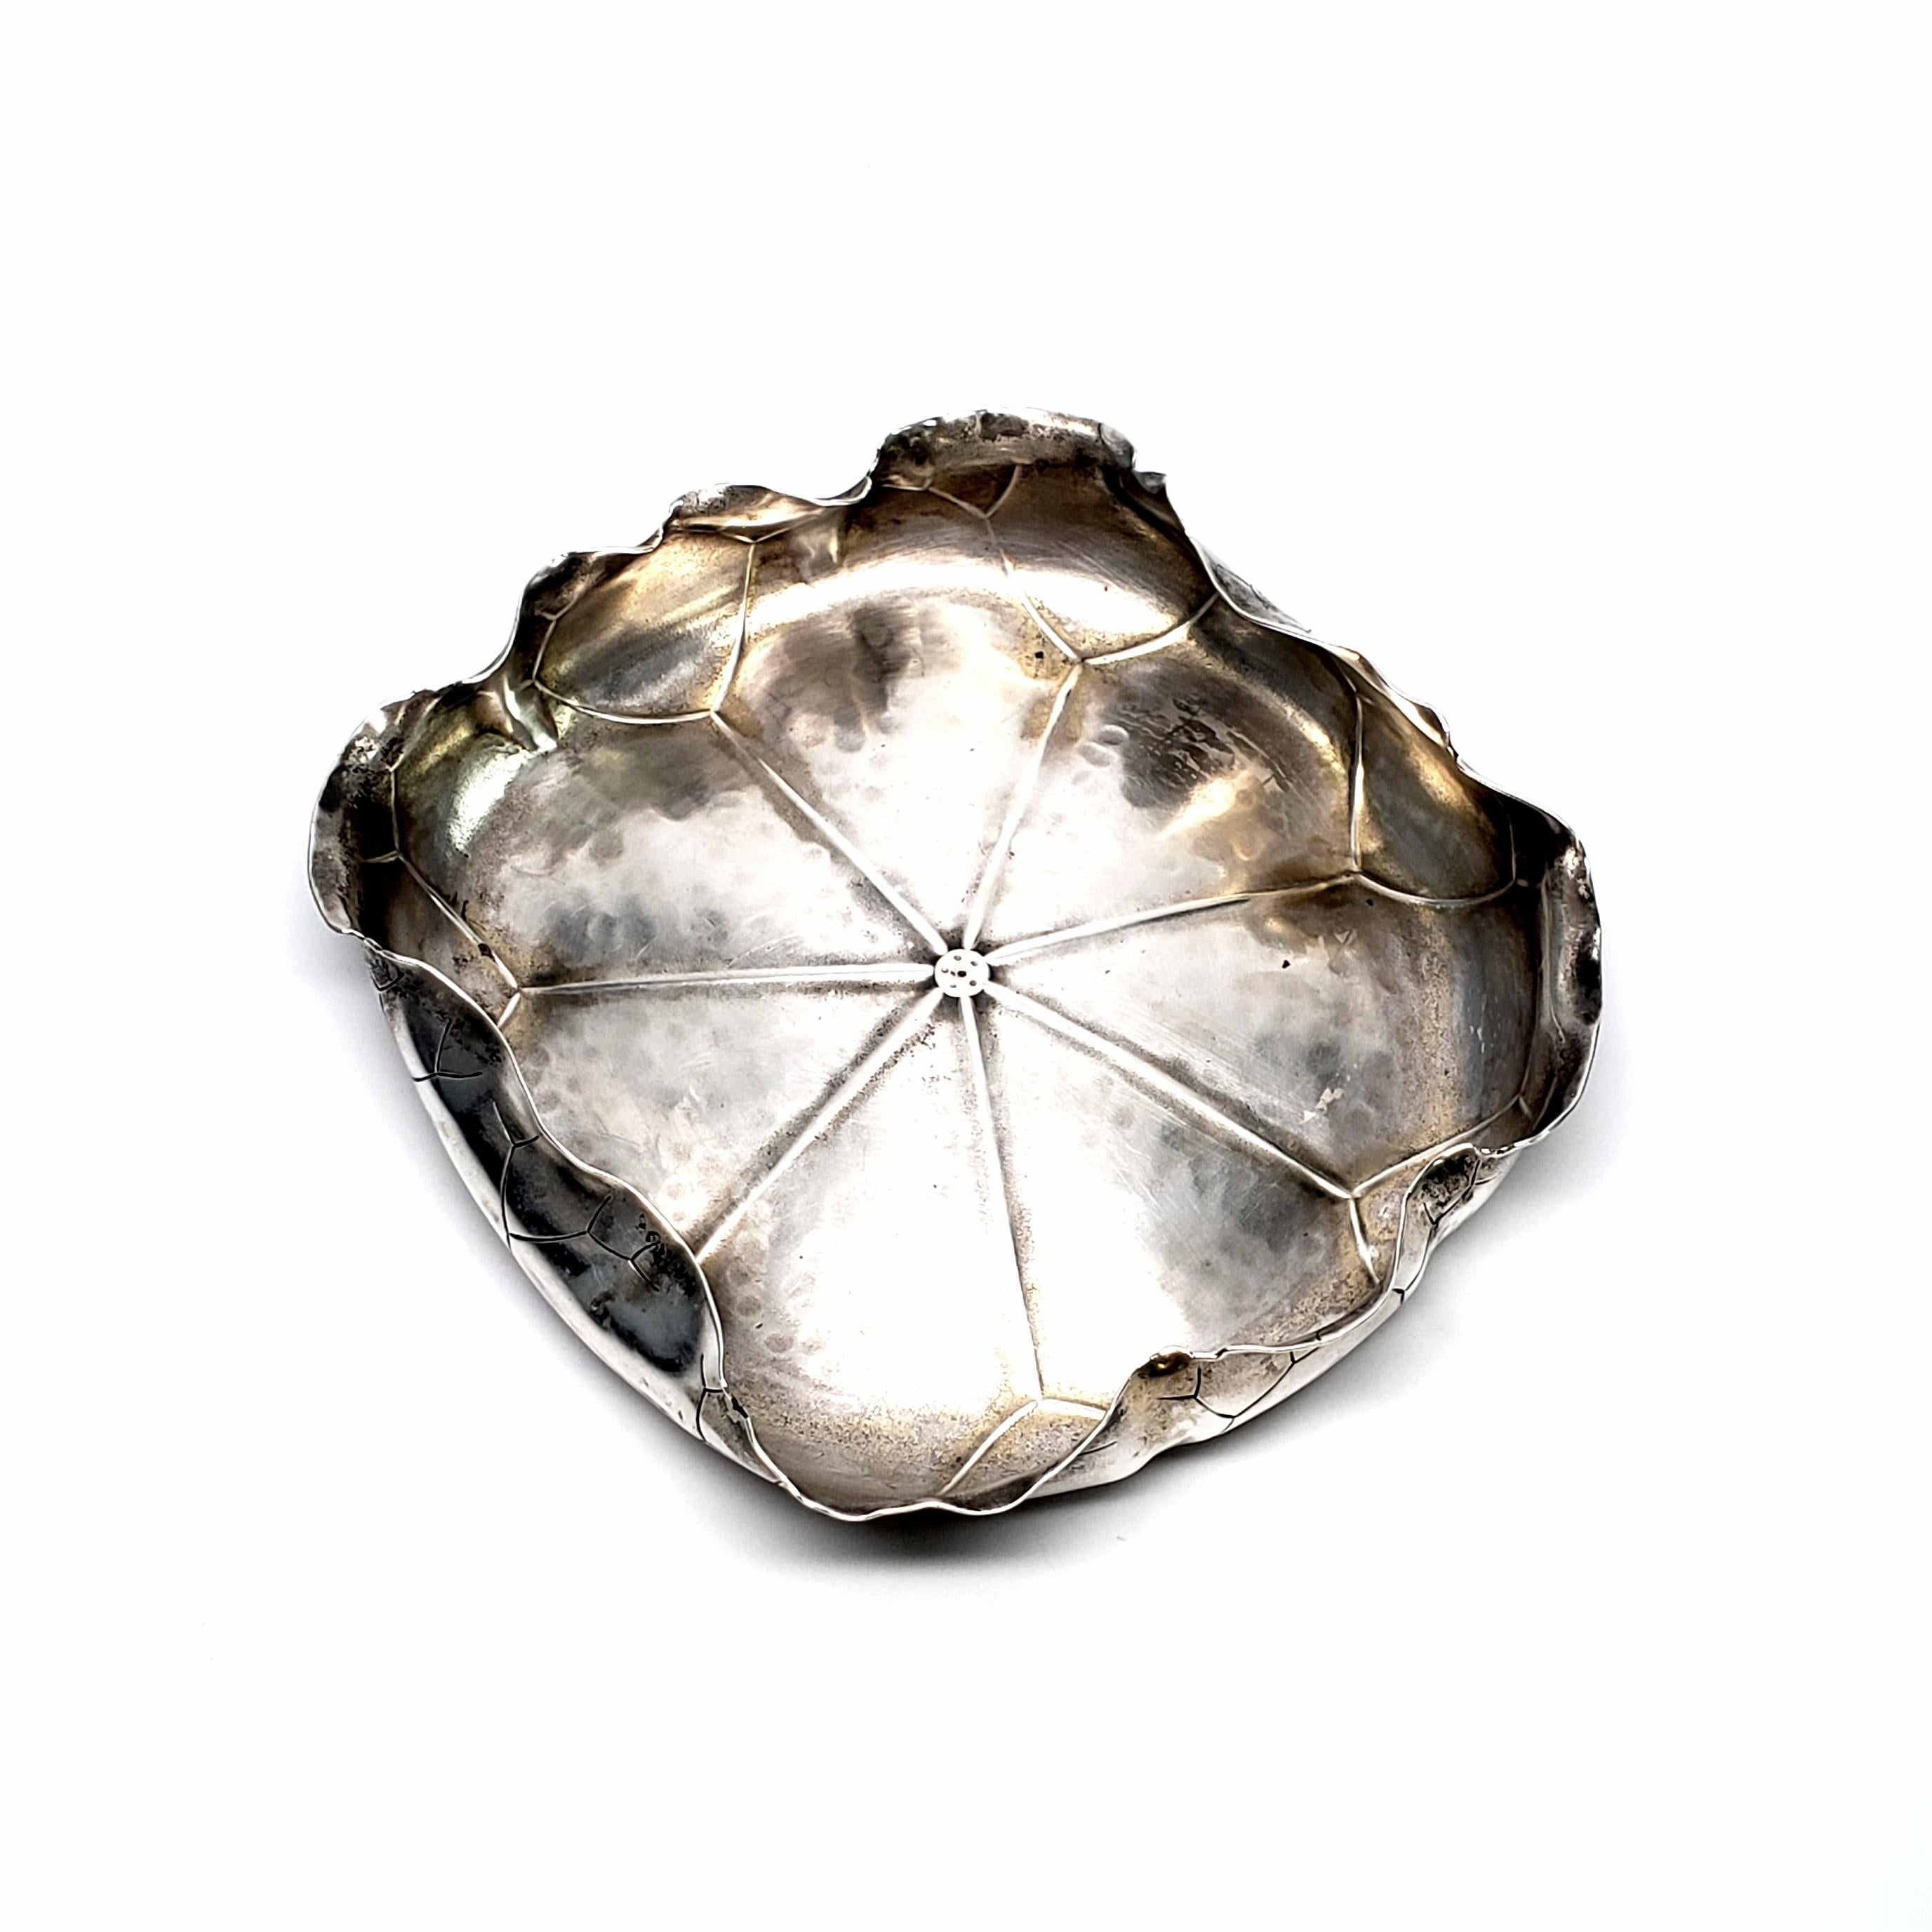 Antique sterling silver lily pad bowl George W Shiebler & Co of NY, NY, circa 1880.

This beautiful and unique hand hammered bowl features a turned up rim with asymmetrical curved edges and etched leaf veins.

Measures approx 5